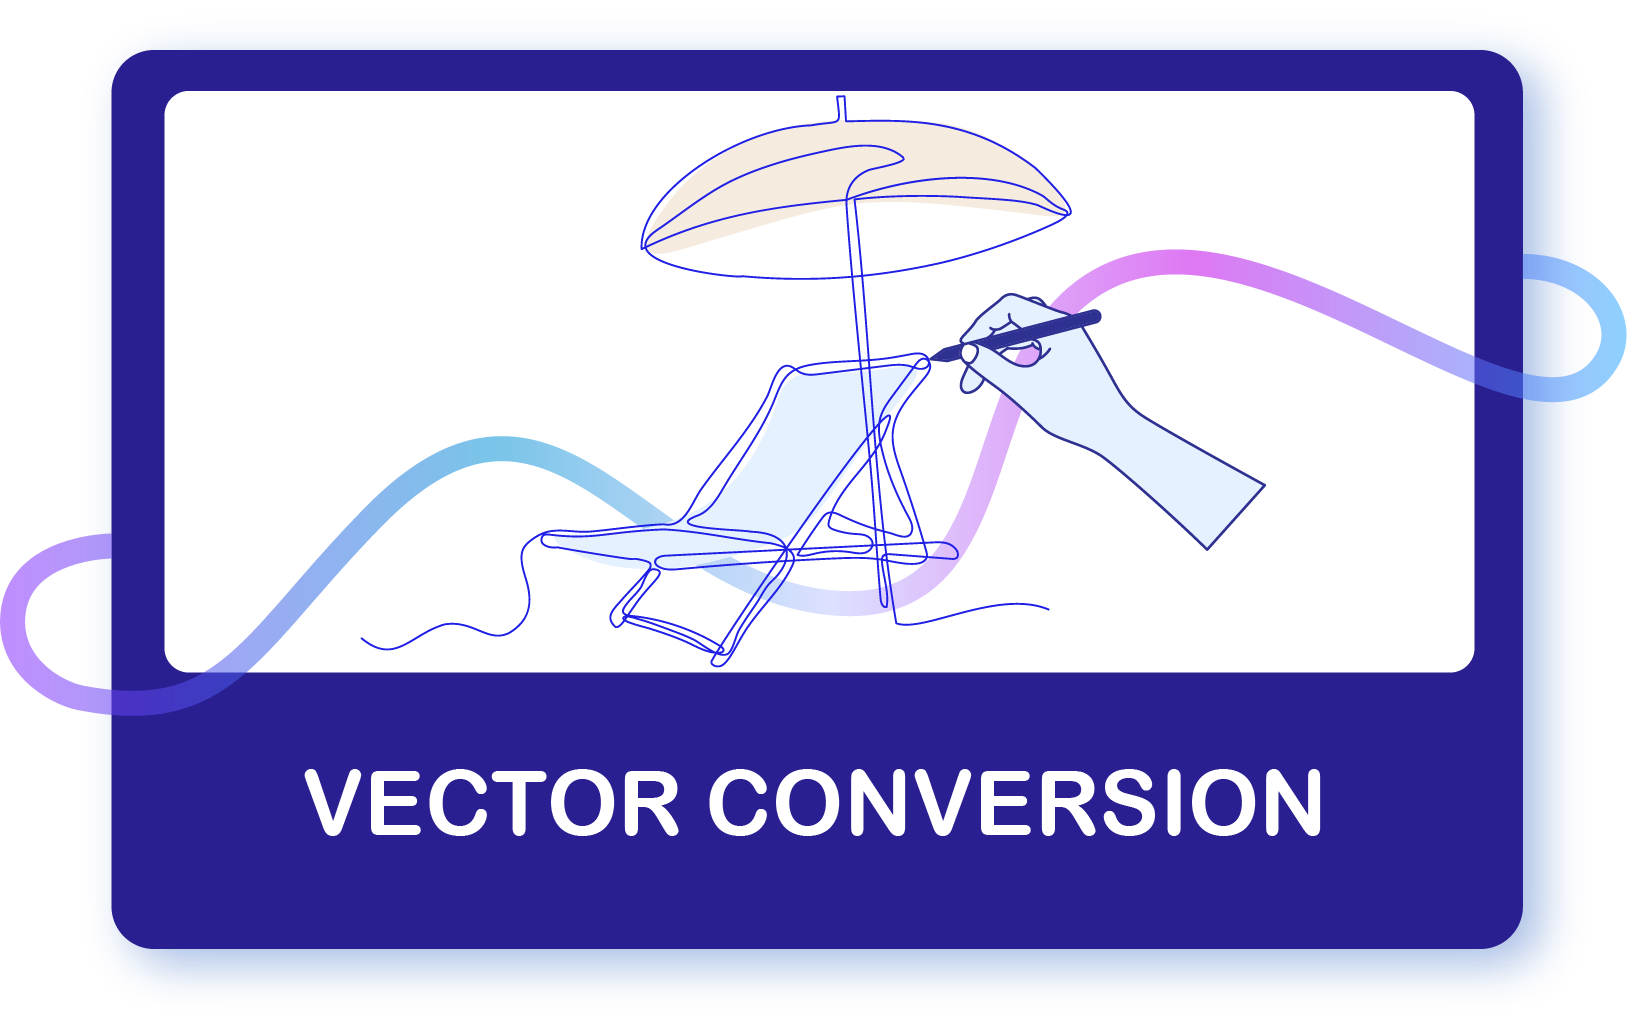 Raster to vector conversion is the process of converting a bitmap or raster image into a vector format. The process involves tracing the outlines of the image and converting them into vector shapes, such as curves and paths, using vector-based software such as Adobe Illustrator or CorelDRAW.